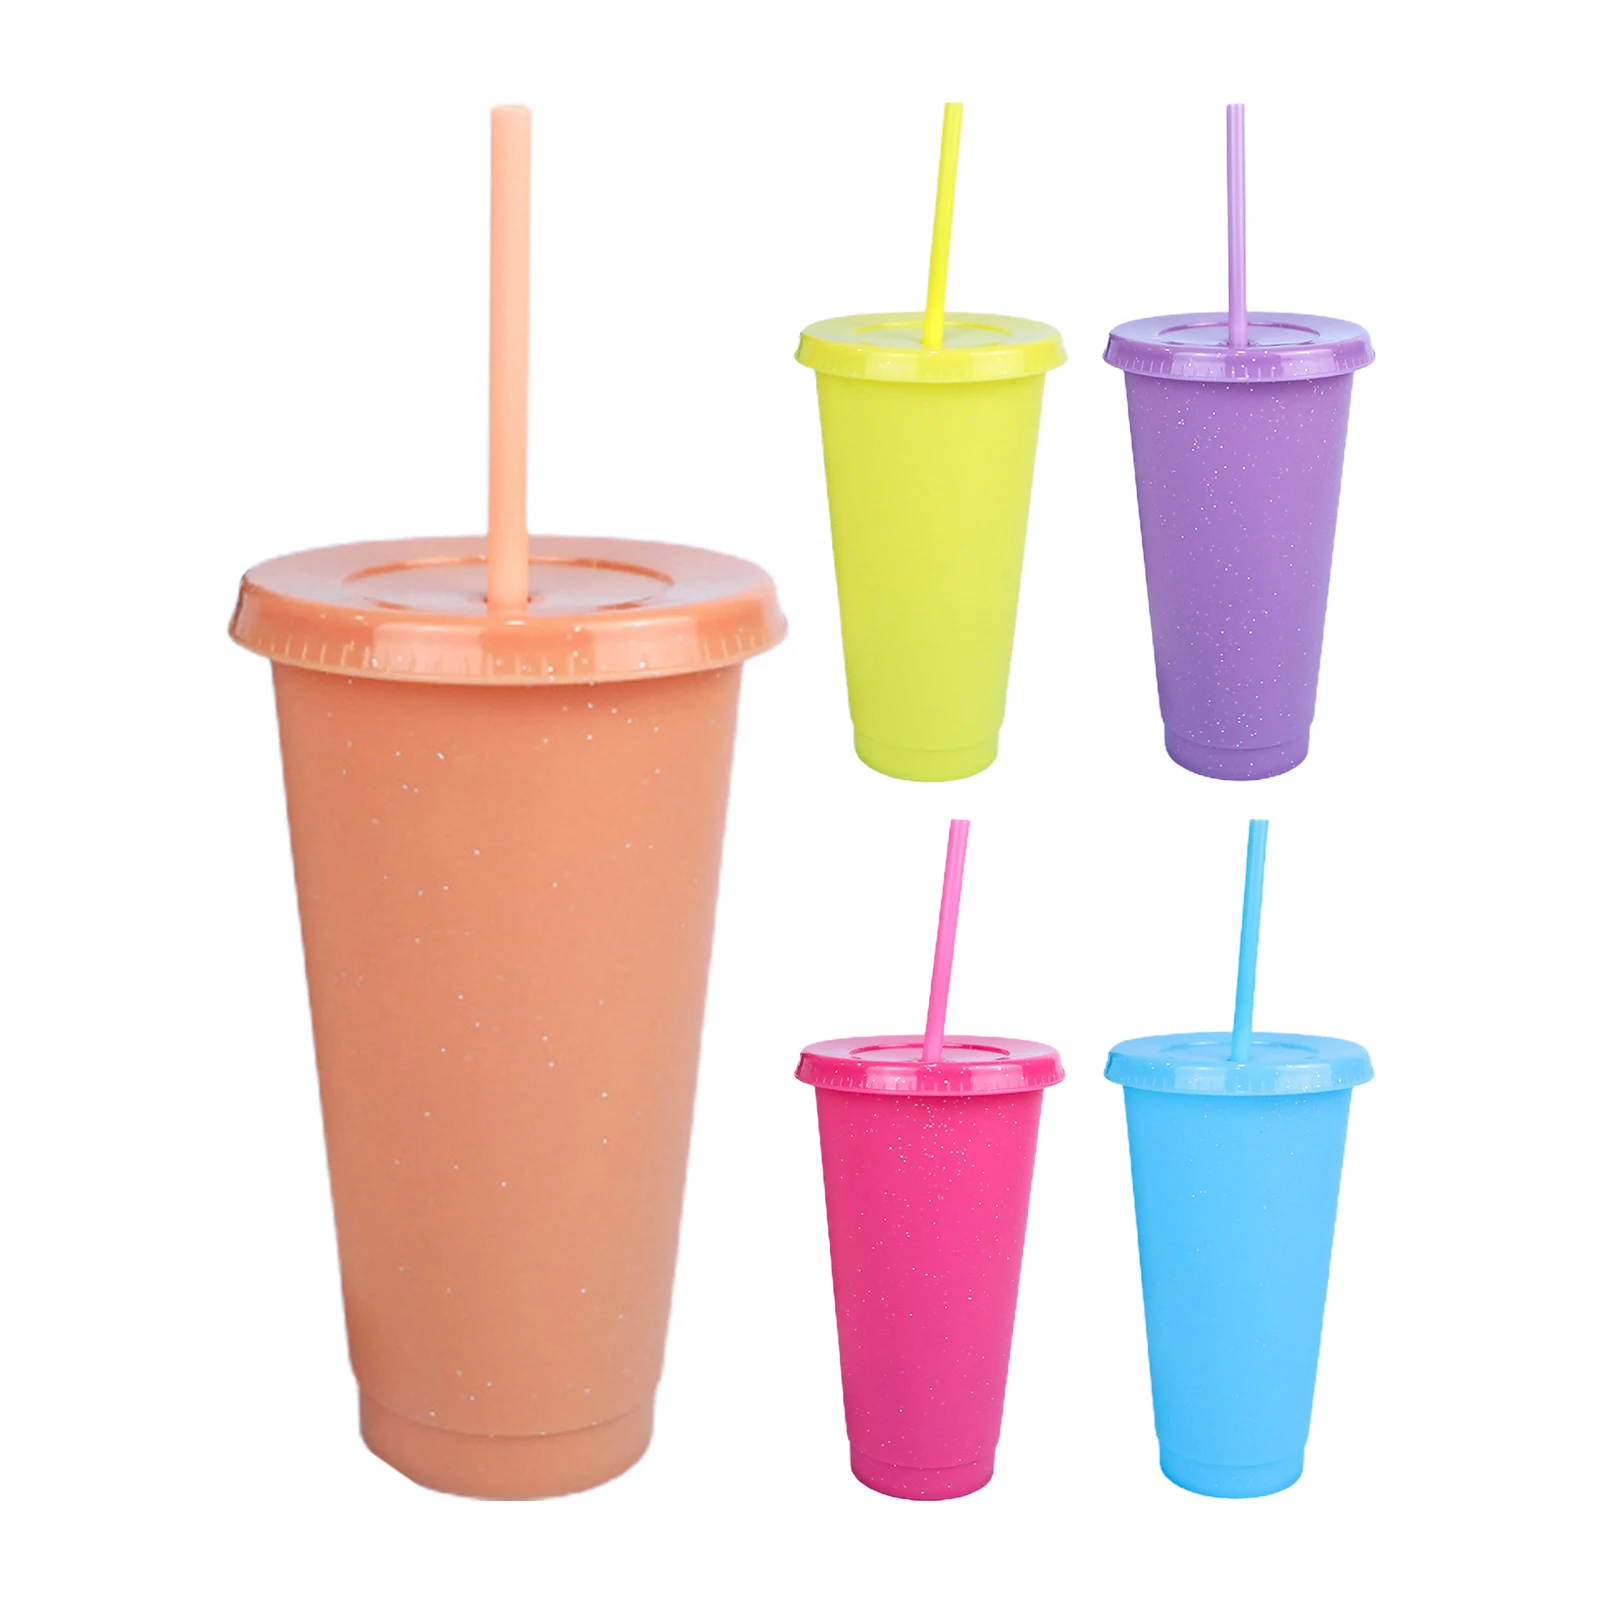 https://ae01.alicdn.com/kf/S498292fc3ea5492c85d93b68b16ecf220/710ML-Straw-Cup-Discoloration-Water-Tumbler-Cup-Color-Changing-Water-Bottle-Tumbler-with-Straw-Drinking-Cup.jpg